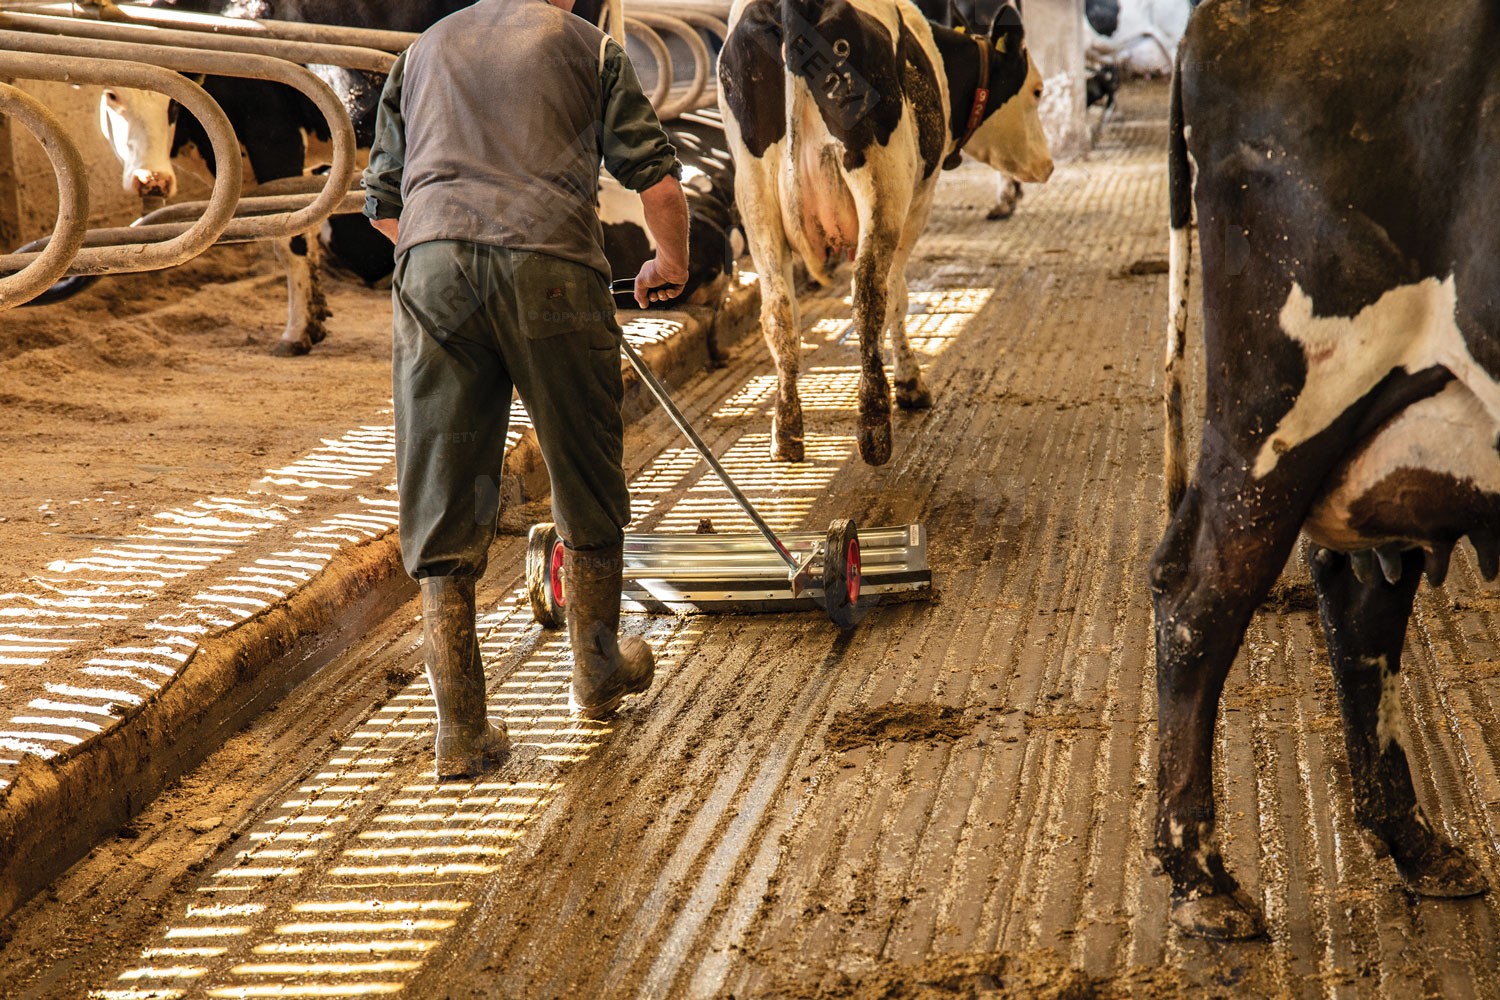 Wheeled Squeegee in use on diary farm